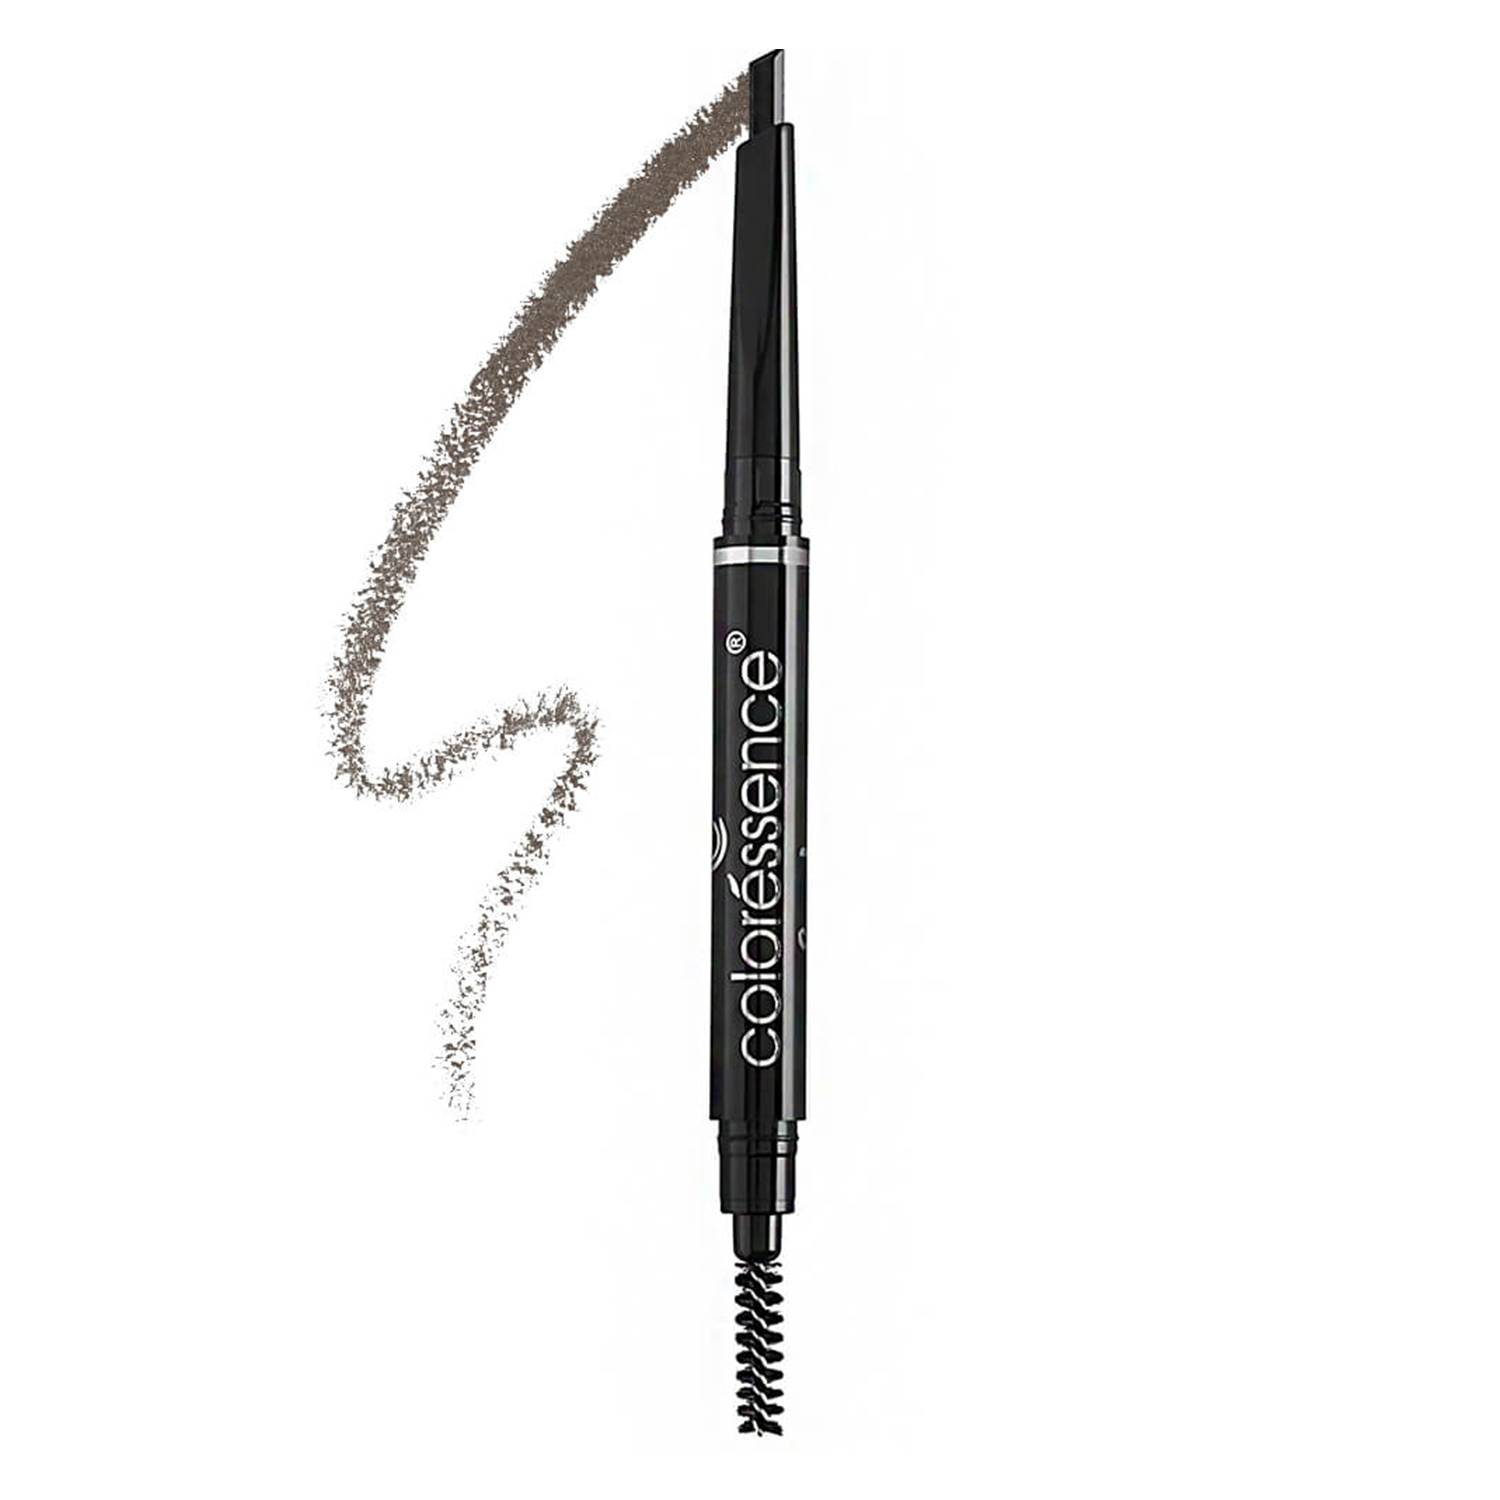 Coloressence Expert Eye Brow Pencil 2 In 1 Dual Function Eye Brow Filling Pencil, 0.25gm-Brown